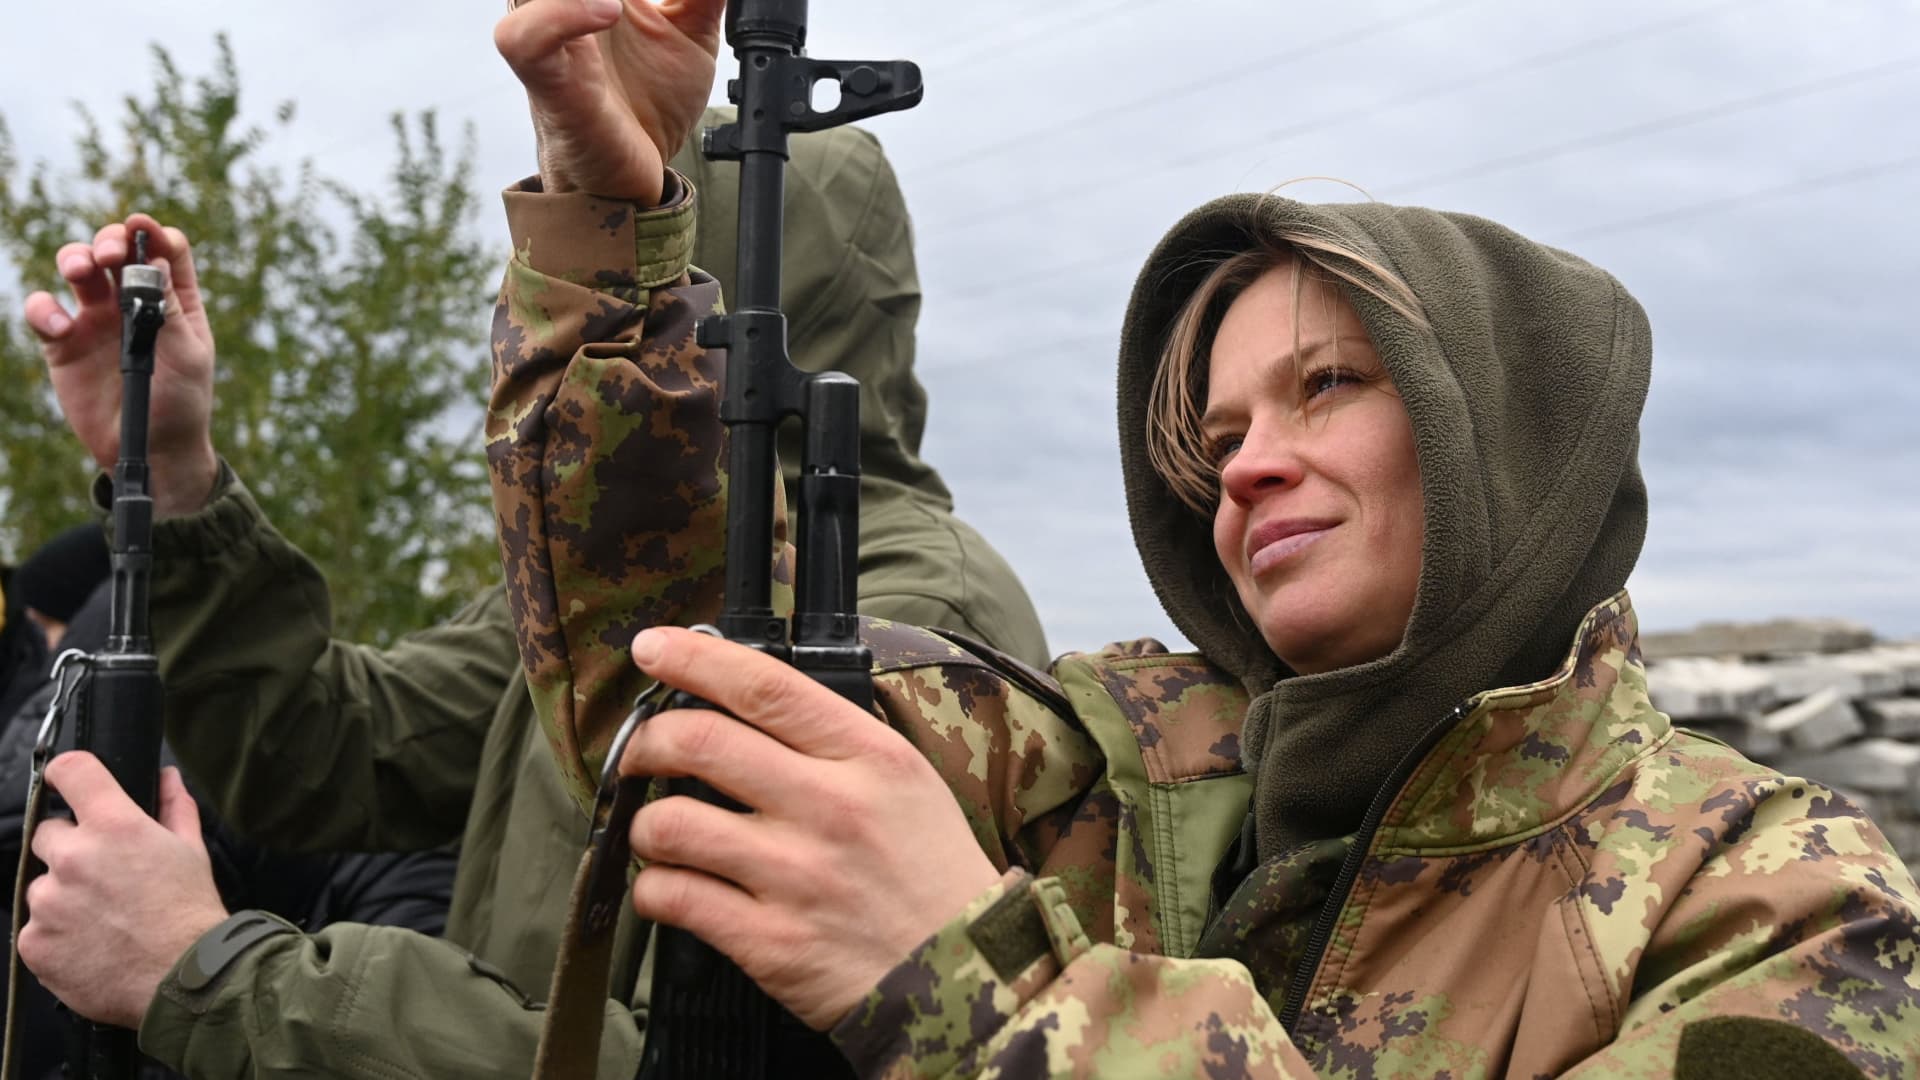 A woman assembles a rifle during a combat training session for civilians organised by local authorities at a range in Rostov Region, Russia October 21, 2022.